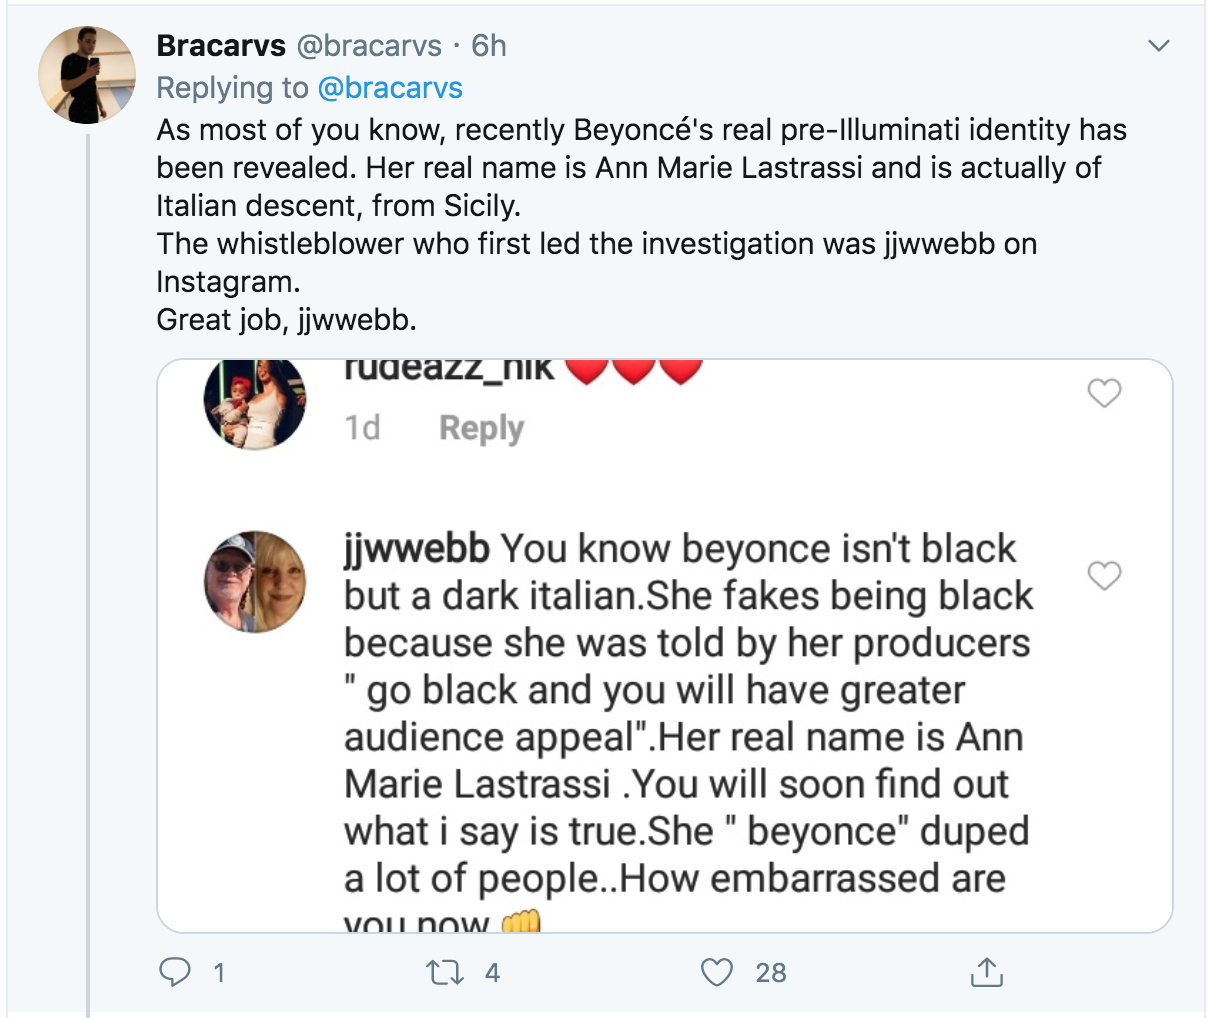 document - Bracarvs . 6h As most of you know, recently Beyonc's real preIlluminati identity has been revealed. Her real name is Ann Marie Lastrassi and is actually of Italian descent, from Sicily. The whistleblower who first led the investigation was jjww